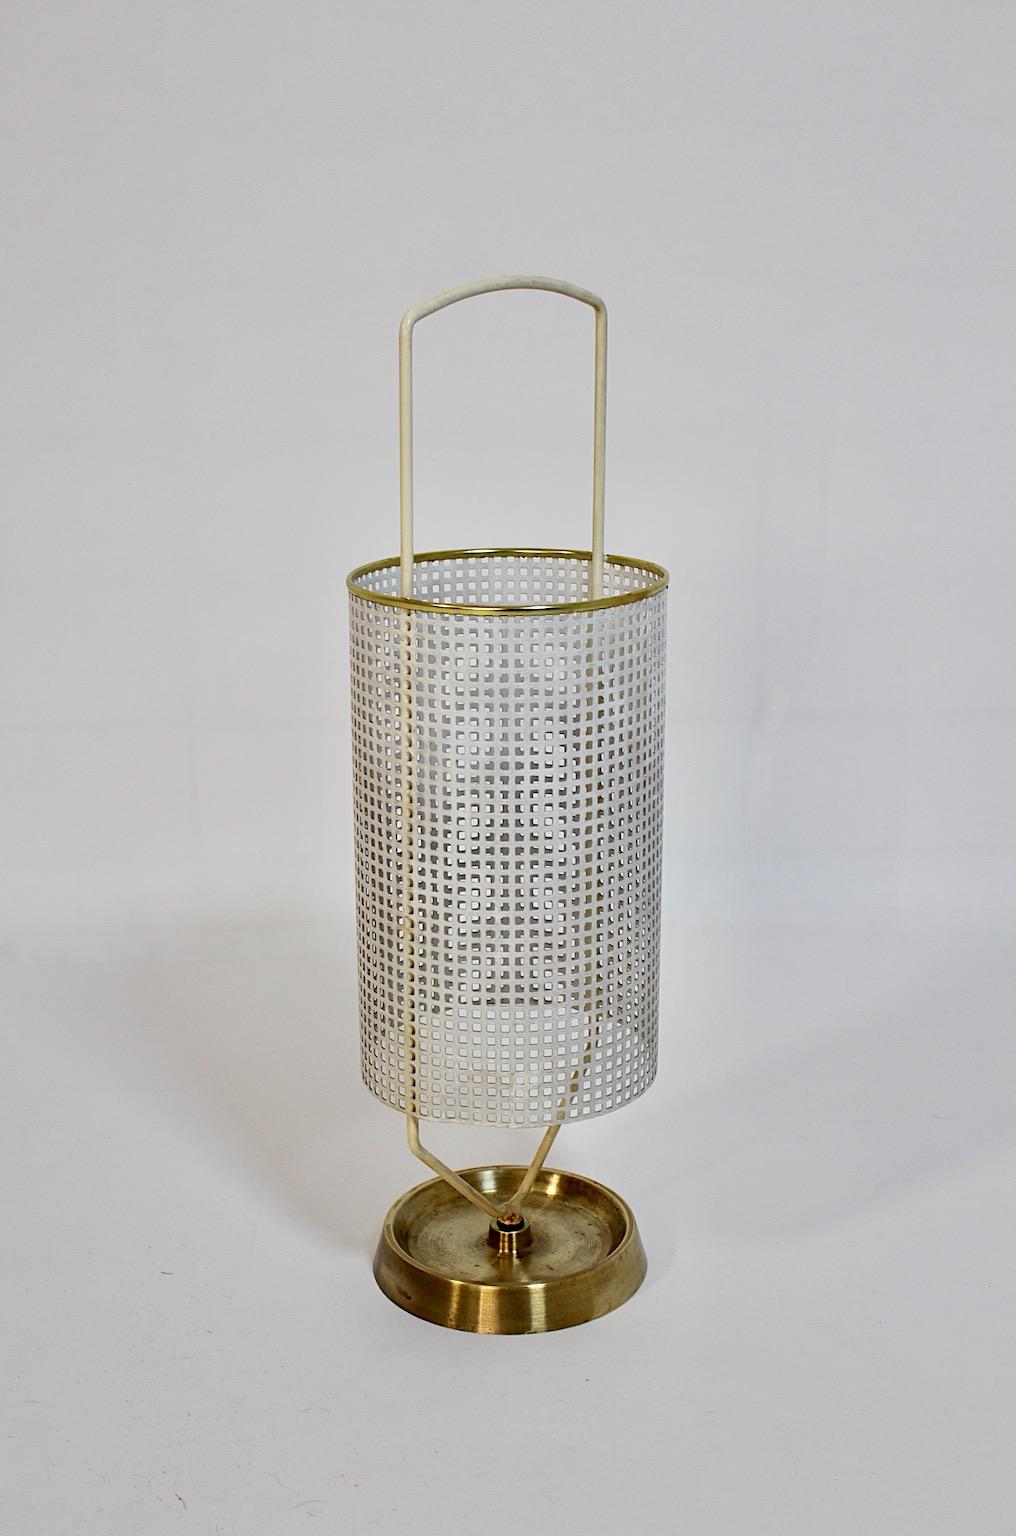 Mid-Century Modern vintage umbrella stand from white metal and brass details 1960s Germany.
An elegant umbrella stand from white perforated sheet metal and brass details 1960s Germany.
This umbrella stand shows a perforated white sheet metal body